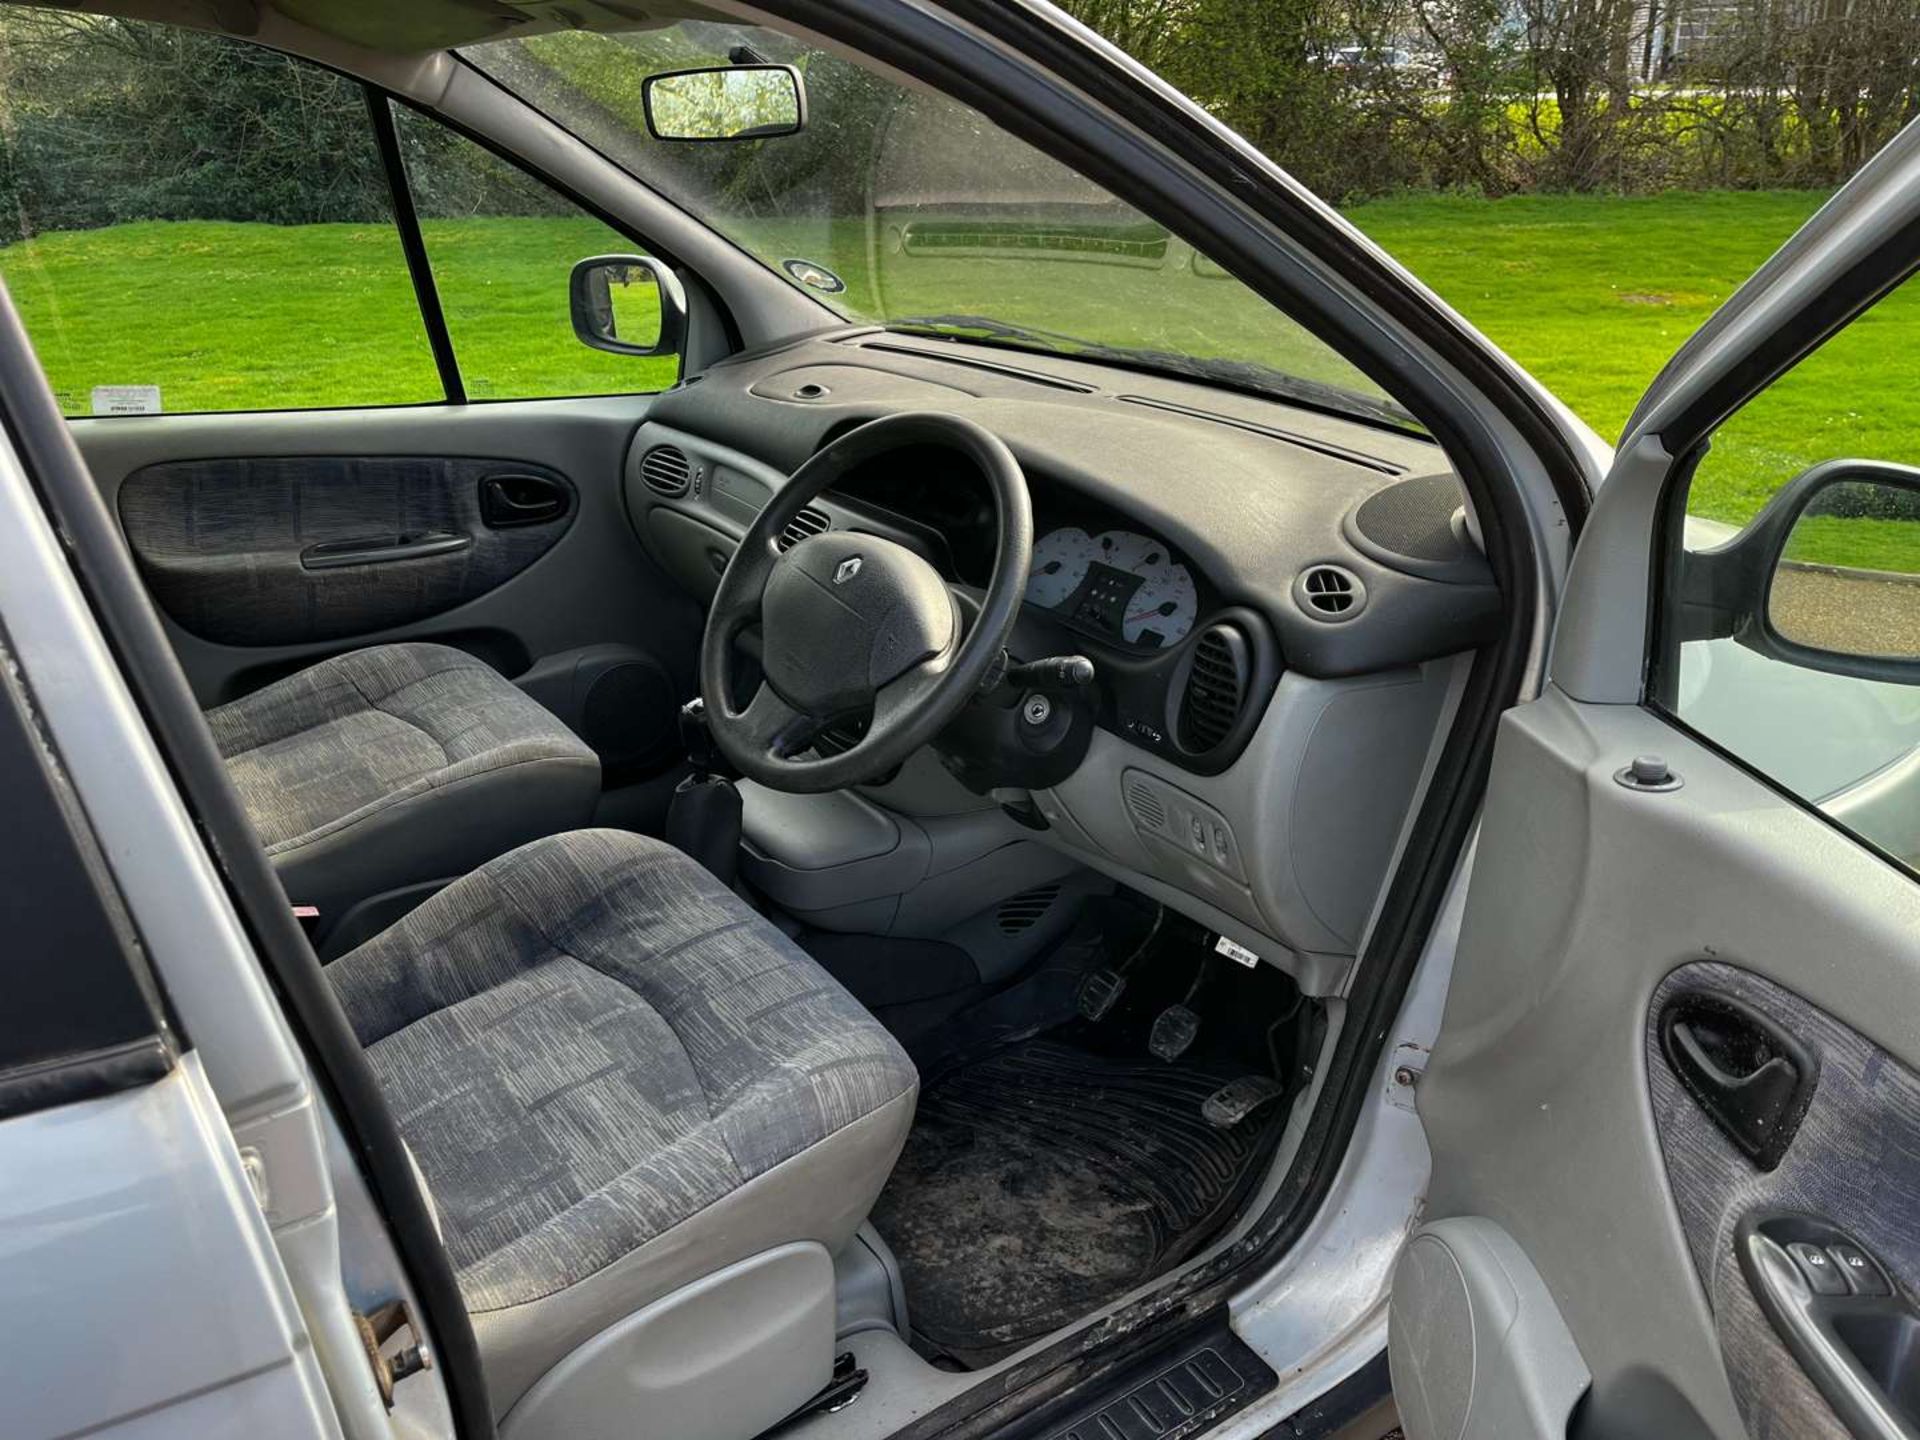 2001 RENAULT MEGANE SCENIC RX4 EXP DCI - Image 17 of 29